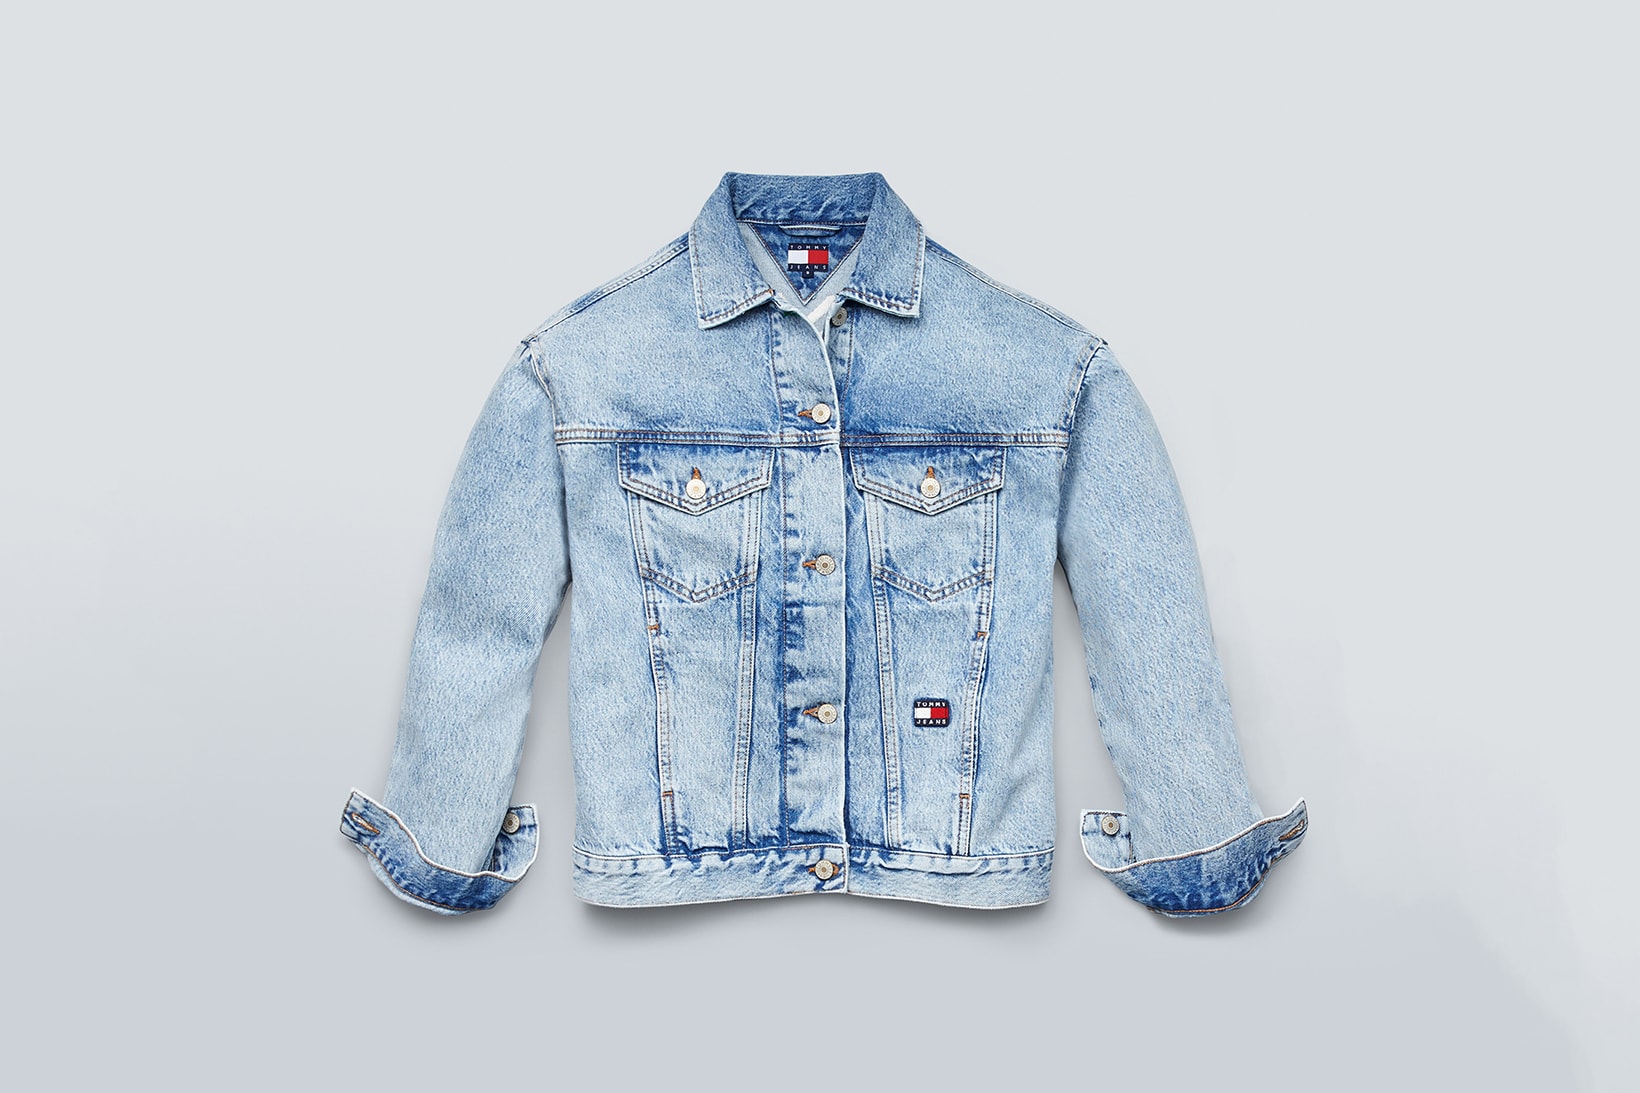 Tommy Jeans Fall 2019 Heritage Collection Denim Jacket Light Blue